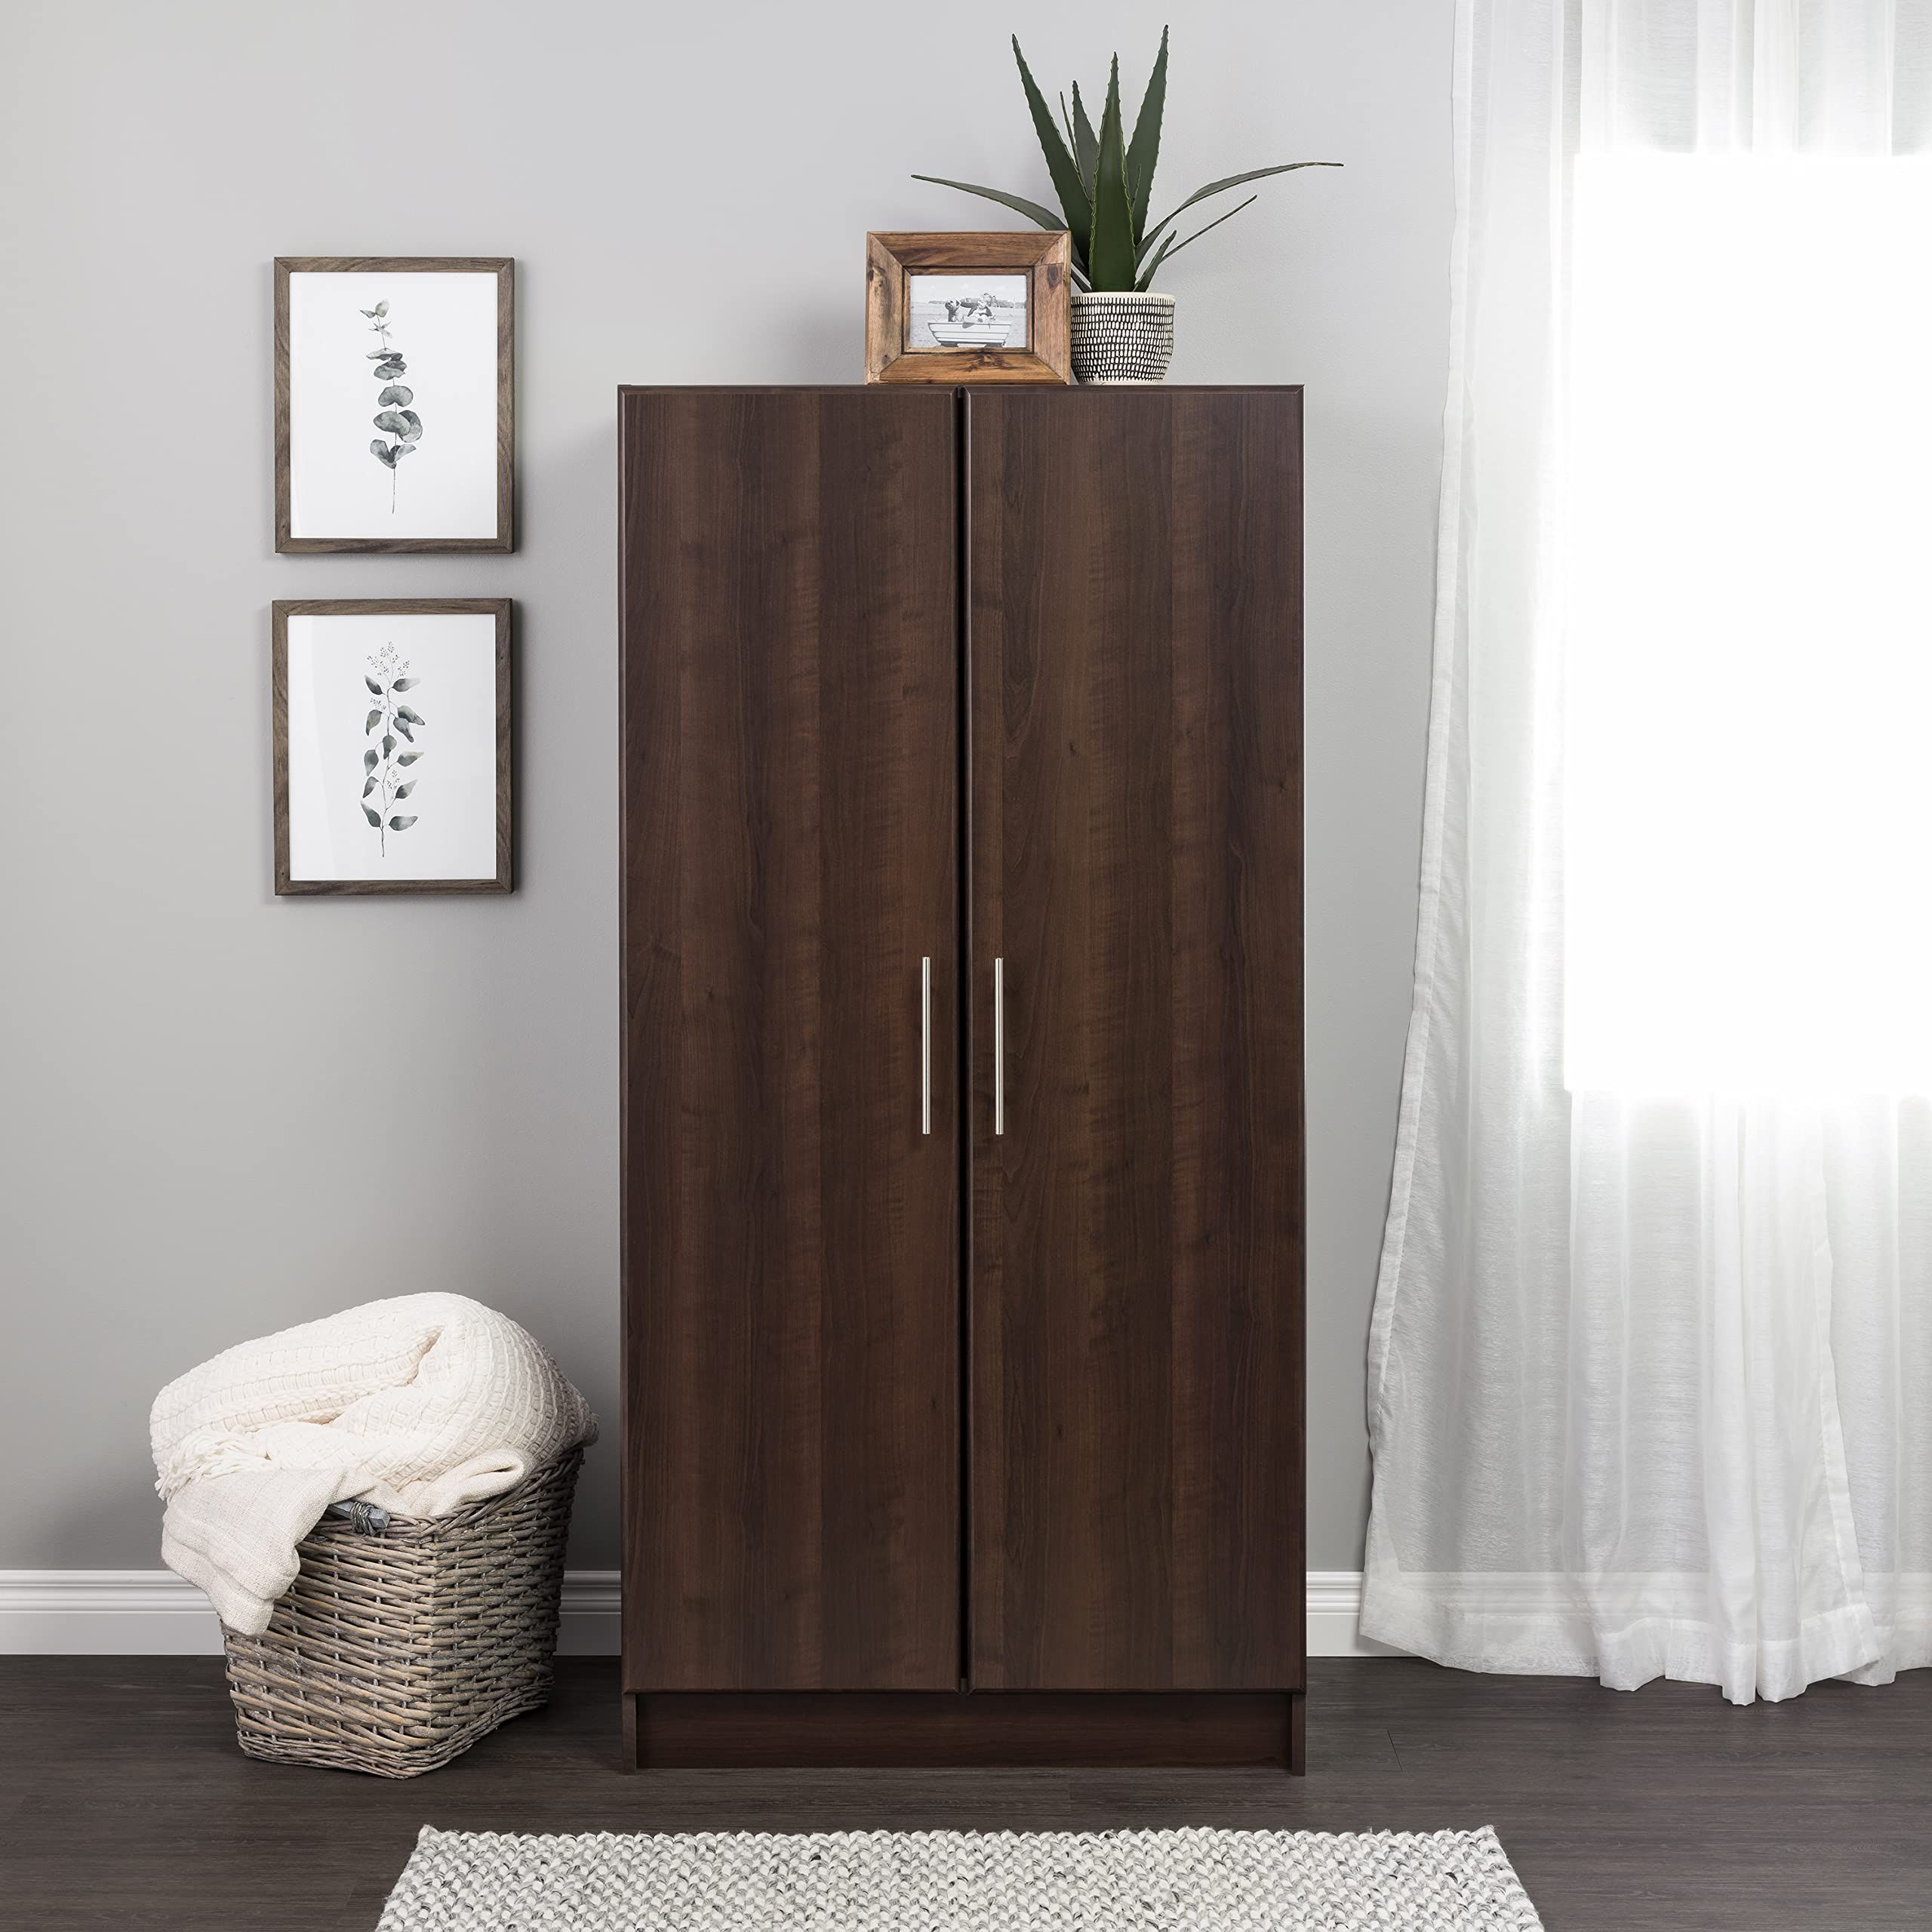 Espresso Wardrobes In Famous Amazon: Prepac Elite Functional Wardrobe Closet With Hanging Rail And  Shelves, Simplistic 2 Door Armoire Portable Closet 21" D X 32" W X 65" H,  Espresso, Eesw 3264 K : Home & Kitchen (View 2 of 10)